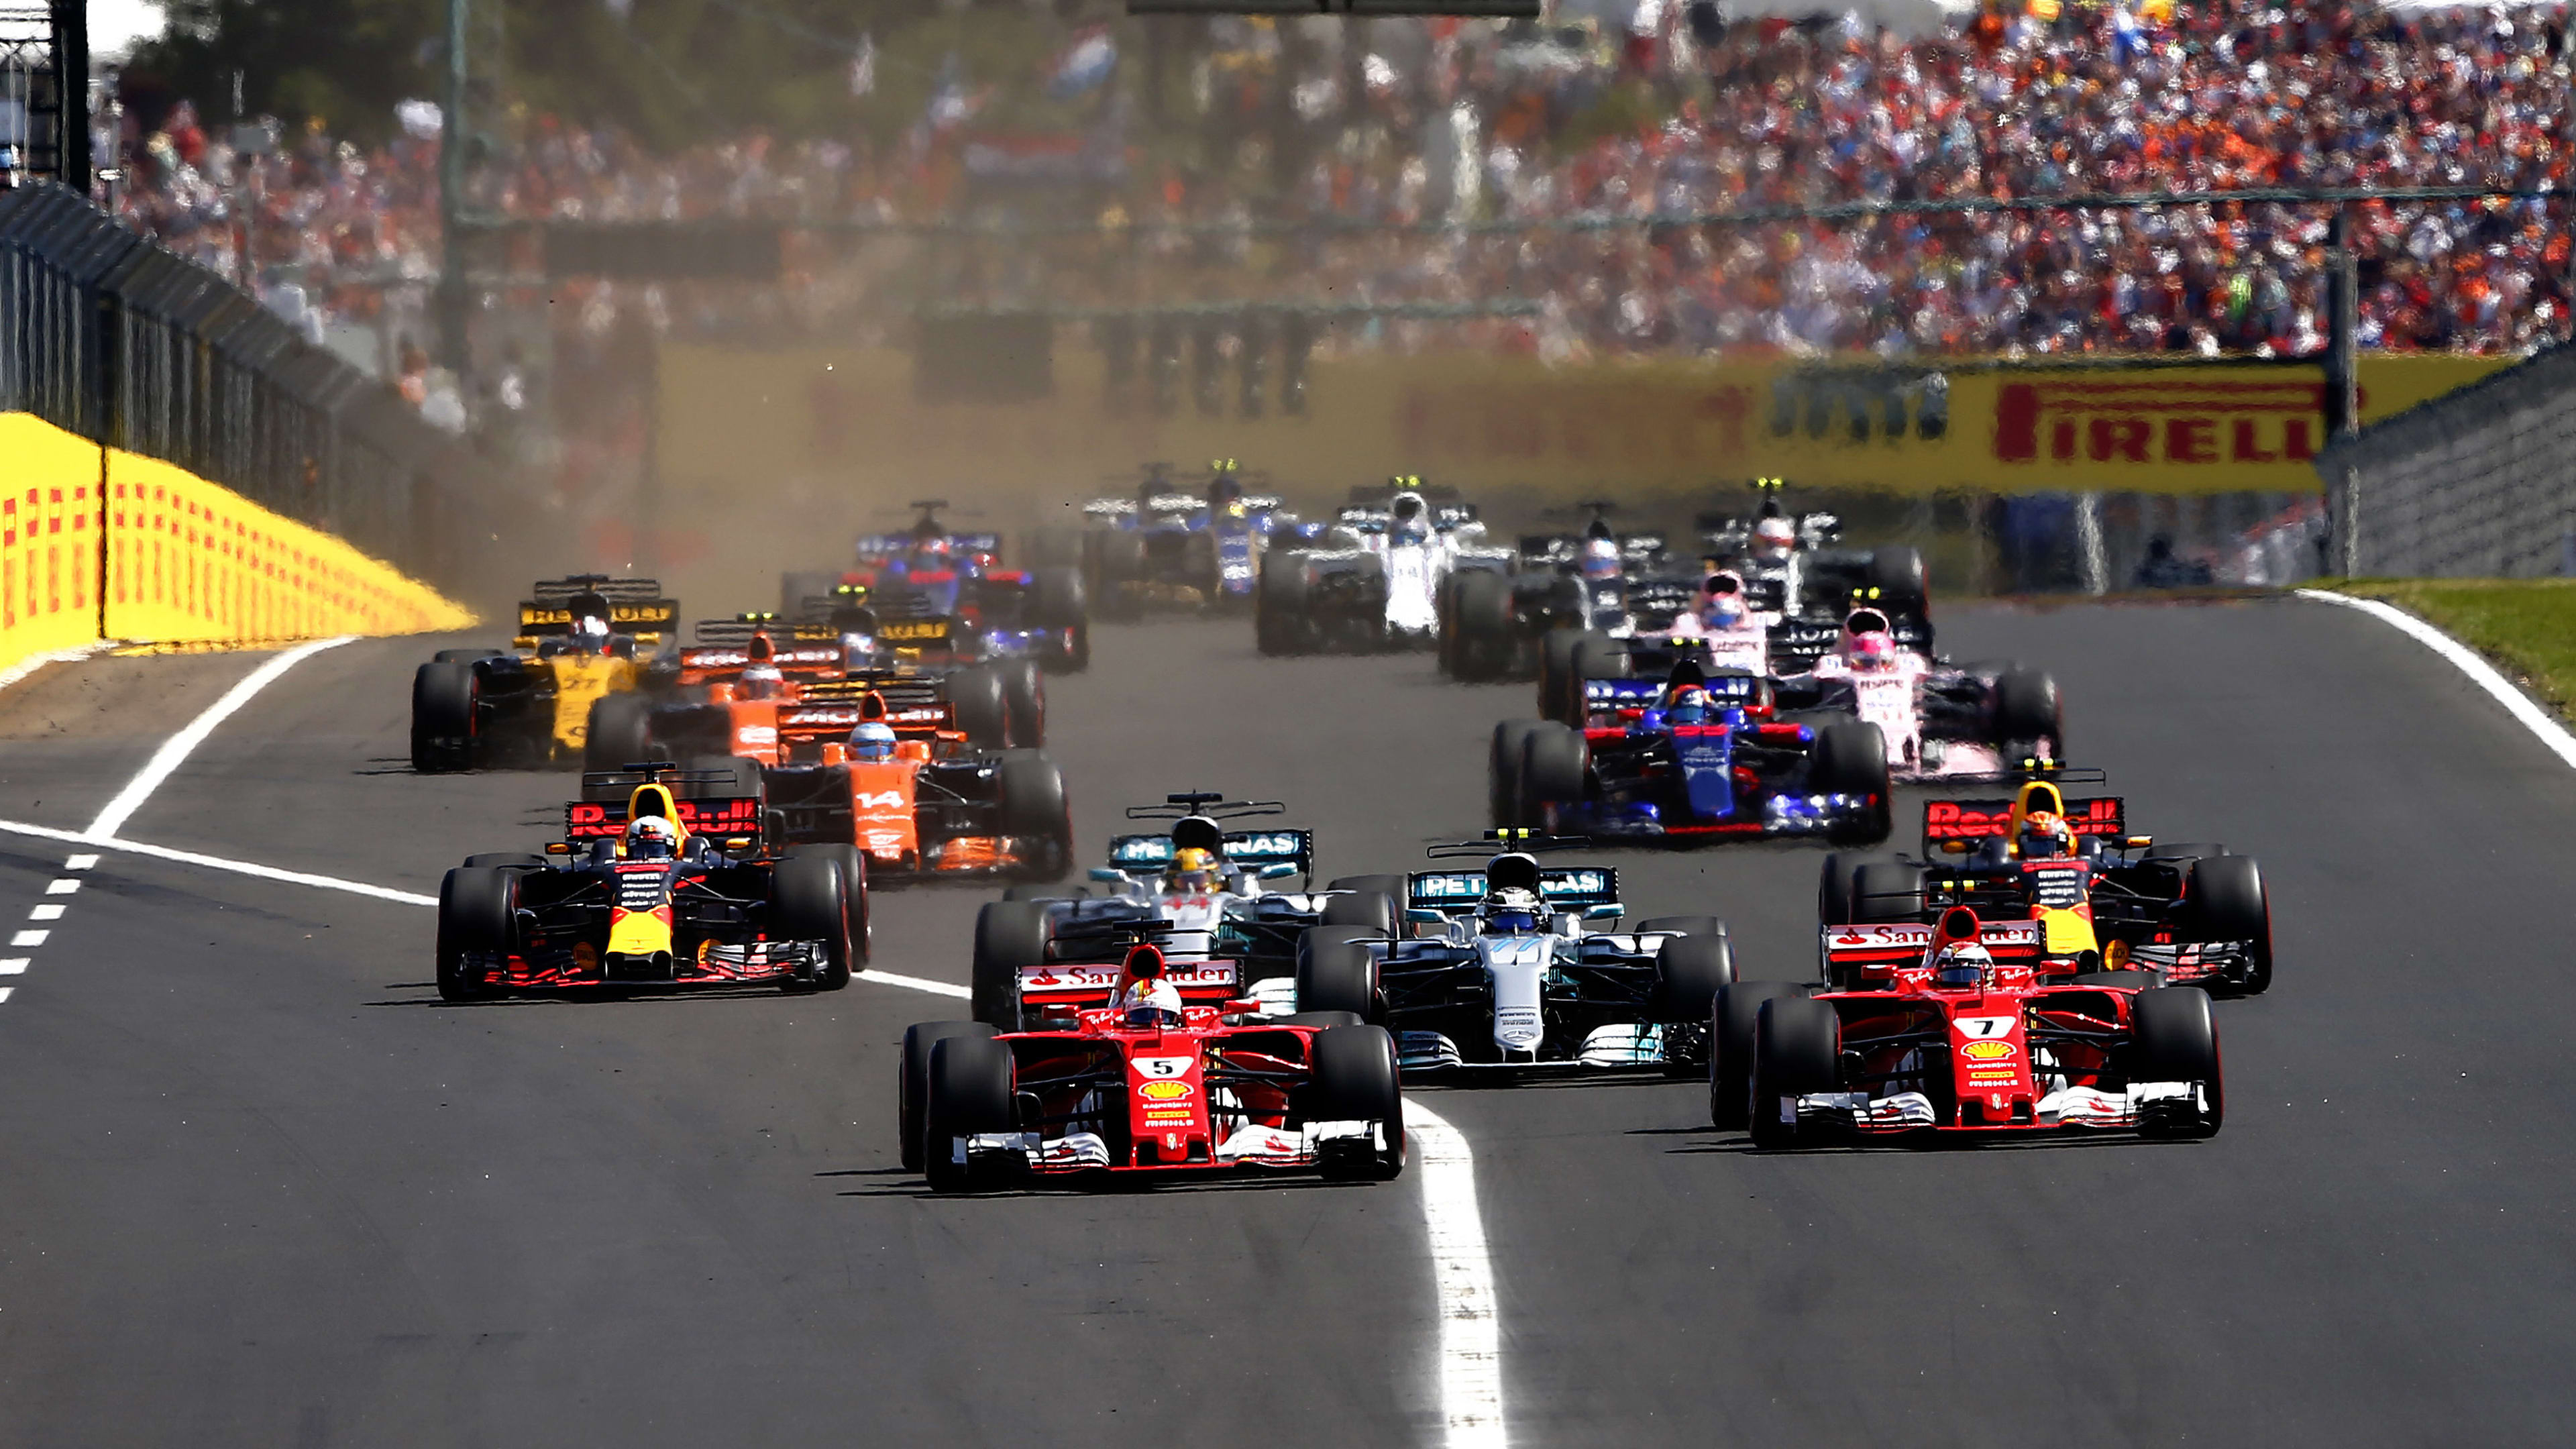 Thursday’s Hot Topic Can Hungary keep the momentum into F1’s summer